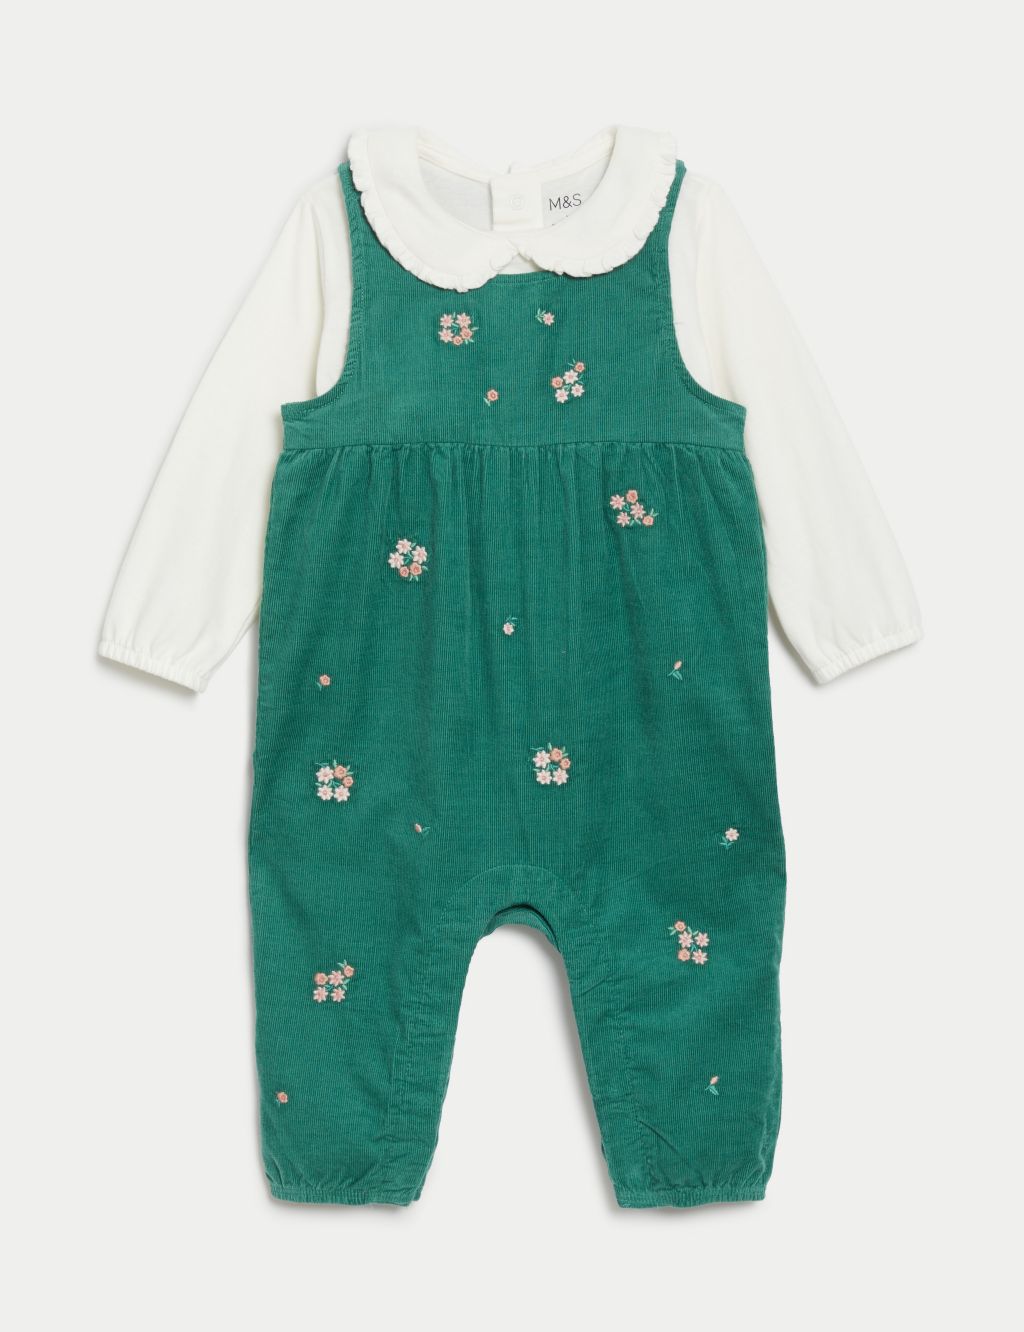 2pc Pure Cotton Embroidered Outfit (0-3 Yrs) image 1